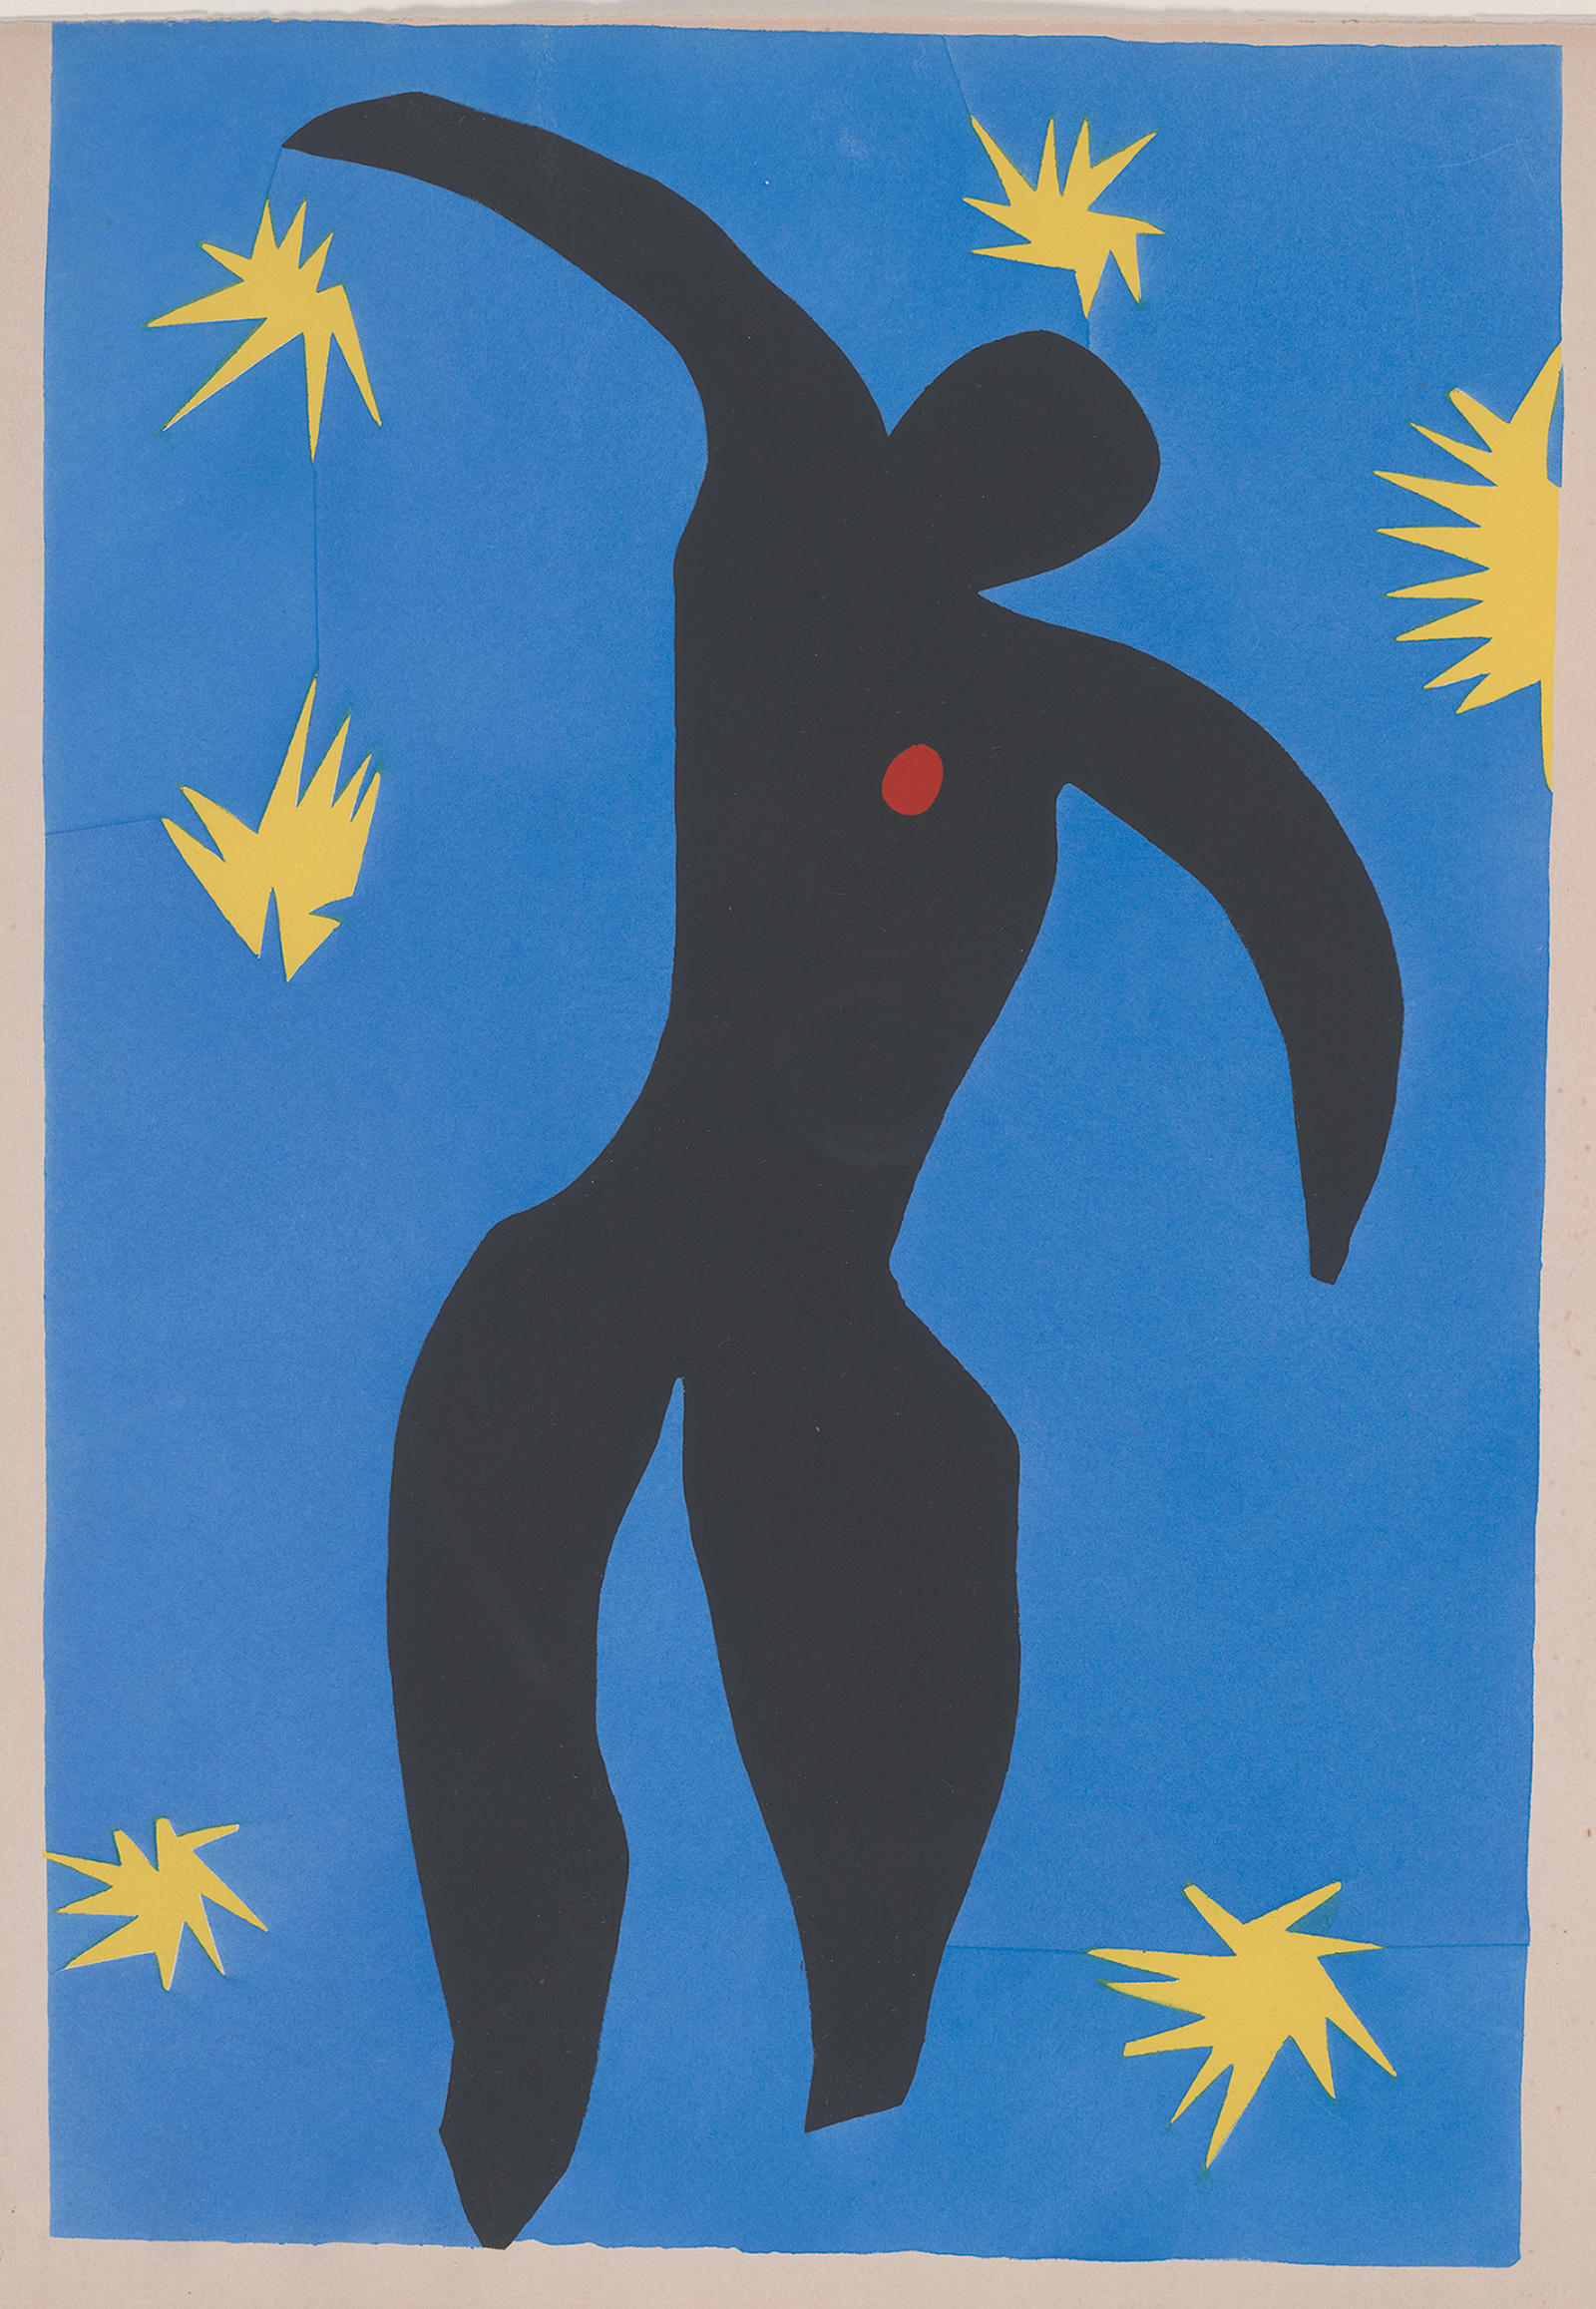 Henri Matisse: Icarus, plate VIII in his book Jazz, 1947; from the Morgan Library and Museum’s recent exhibition ‘Graphic Passion: Matisse and the Book Arts’